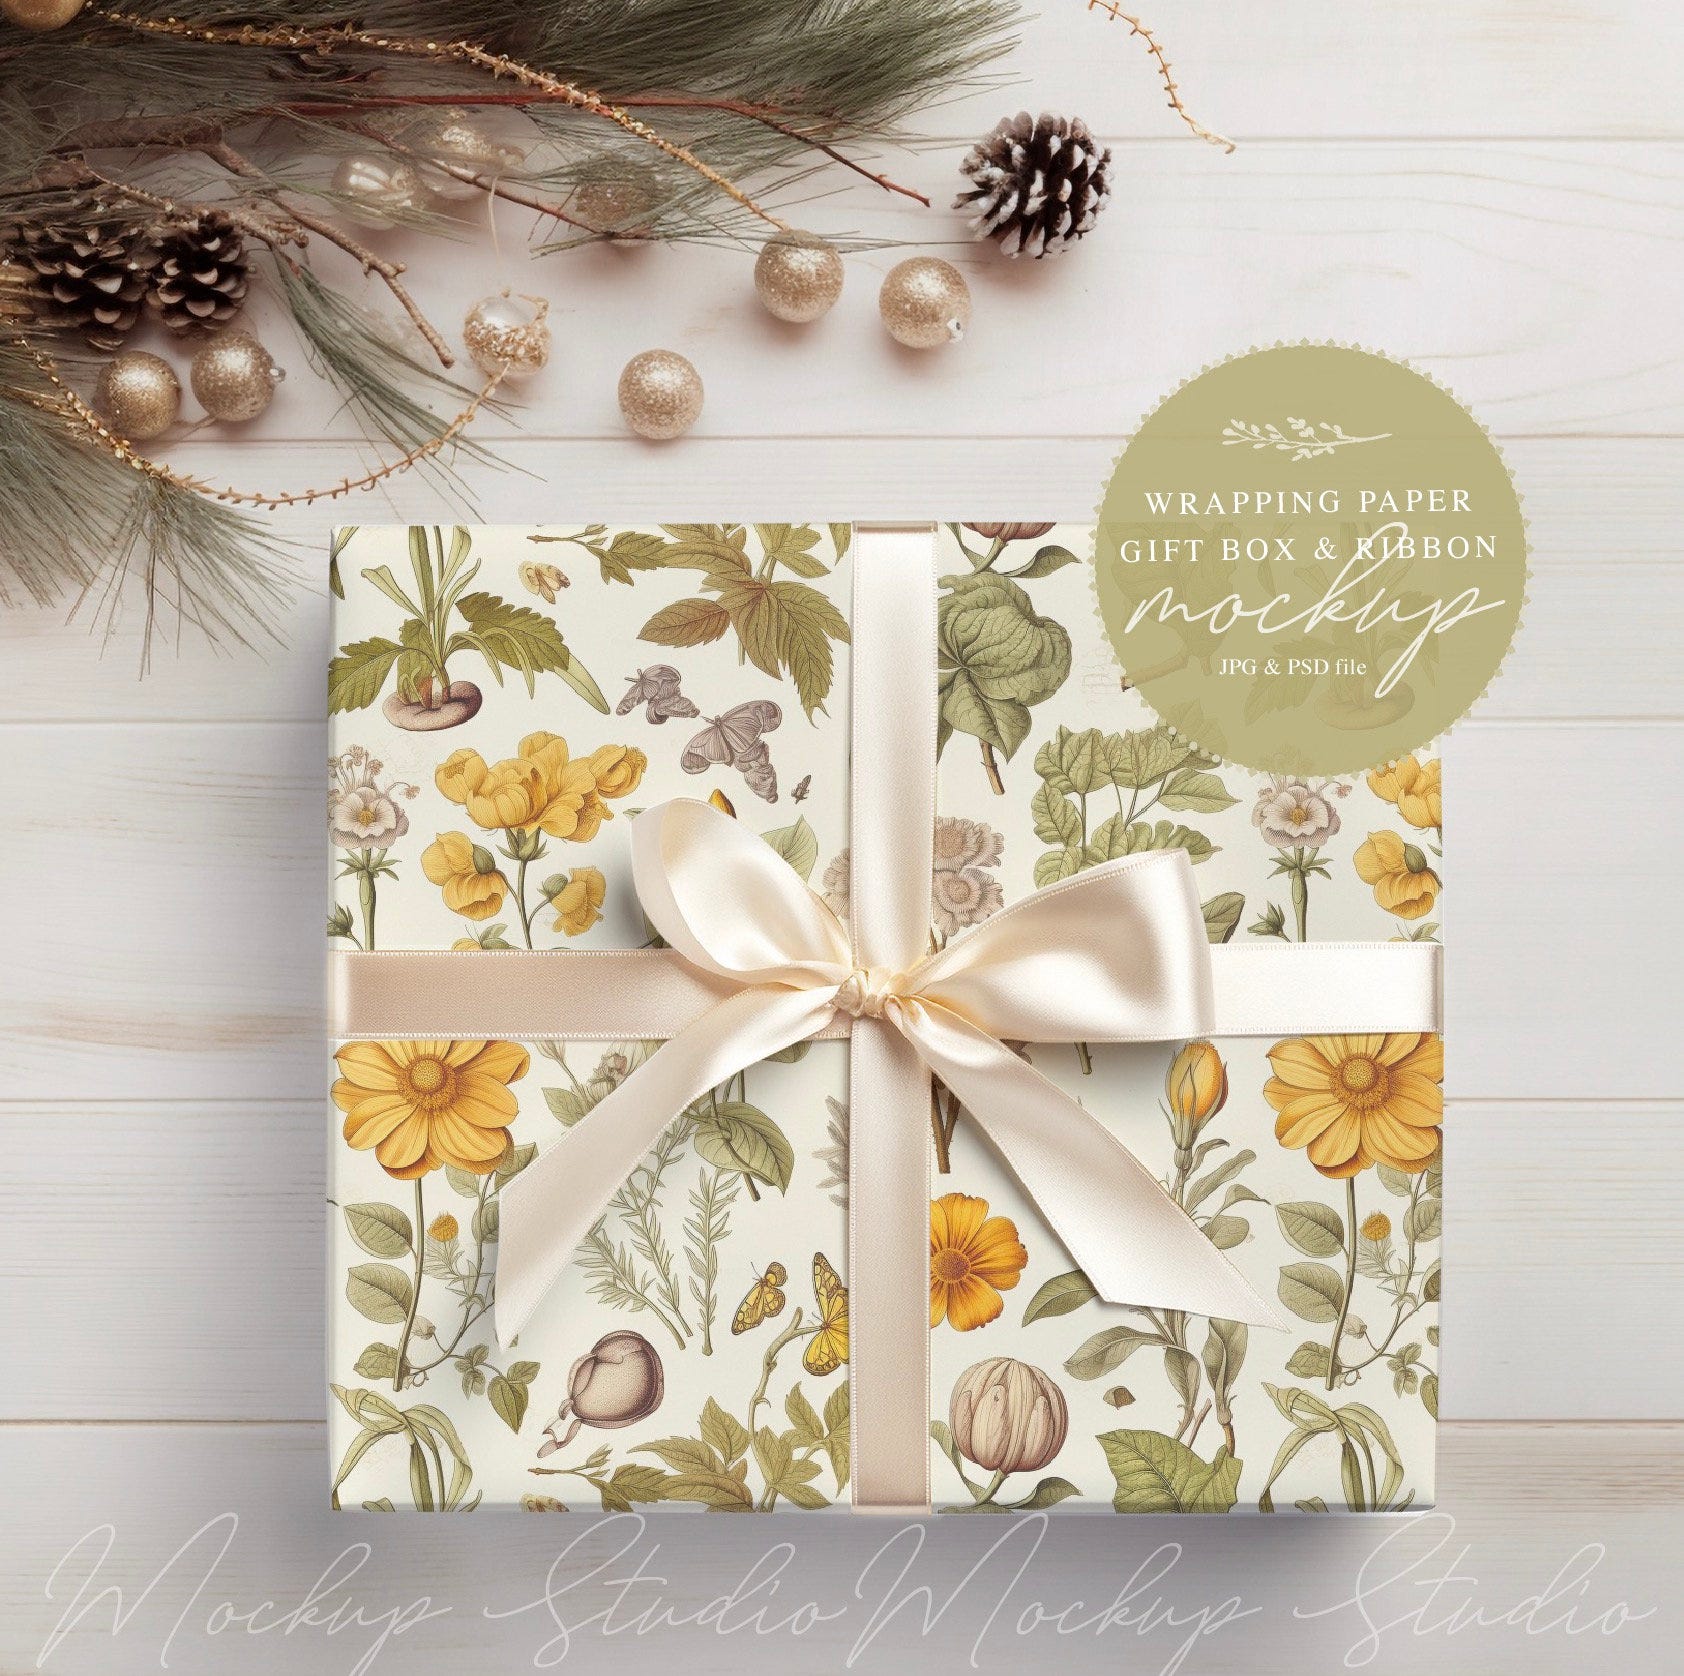 Gift Paper and Ribbon Mockup, Christmas Gift Box Mock-up, Wrapped Present Mockup, PSD with smart object, Wrapping Paper Mockup